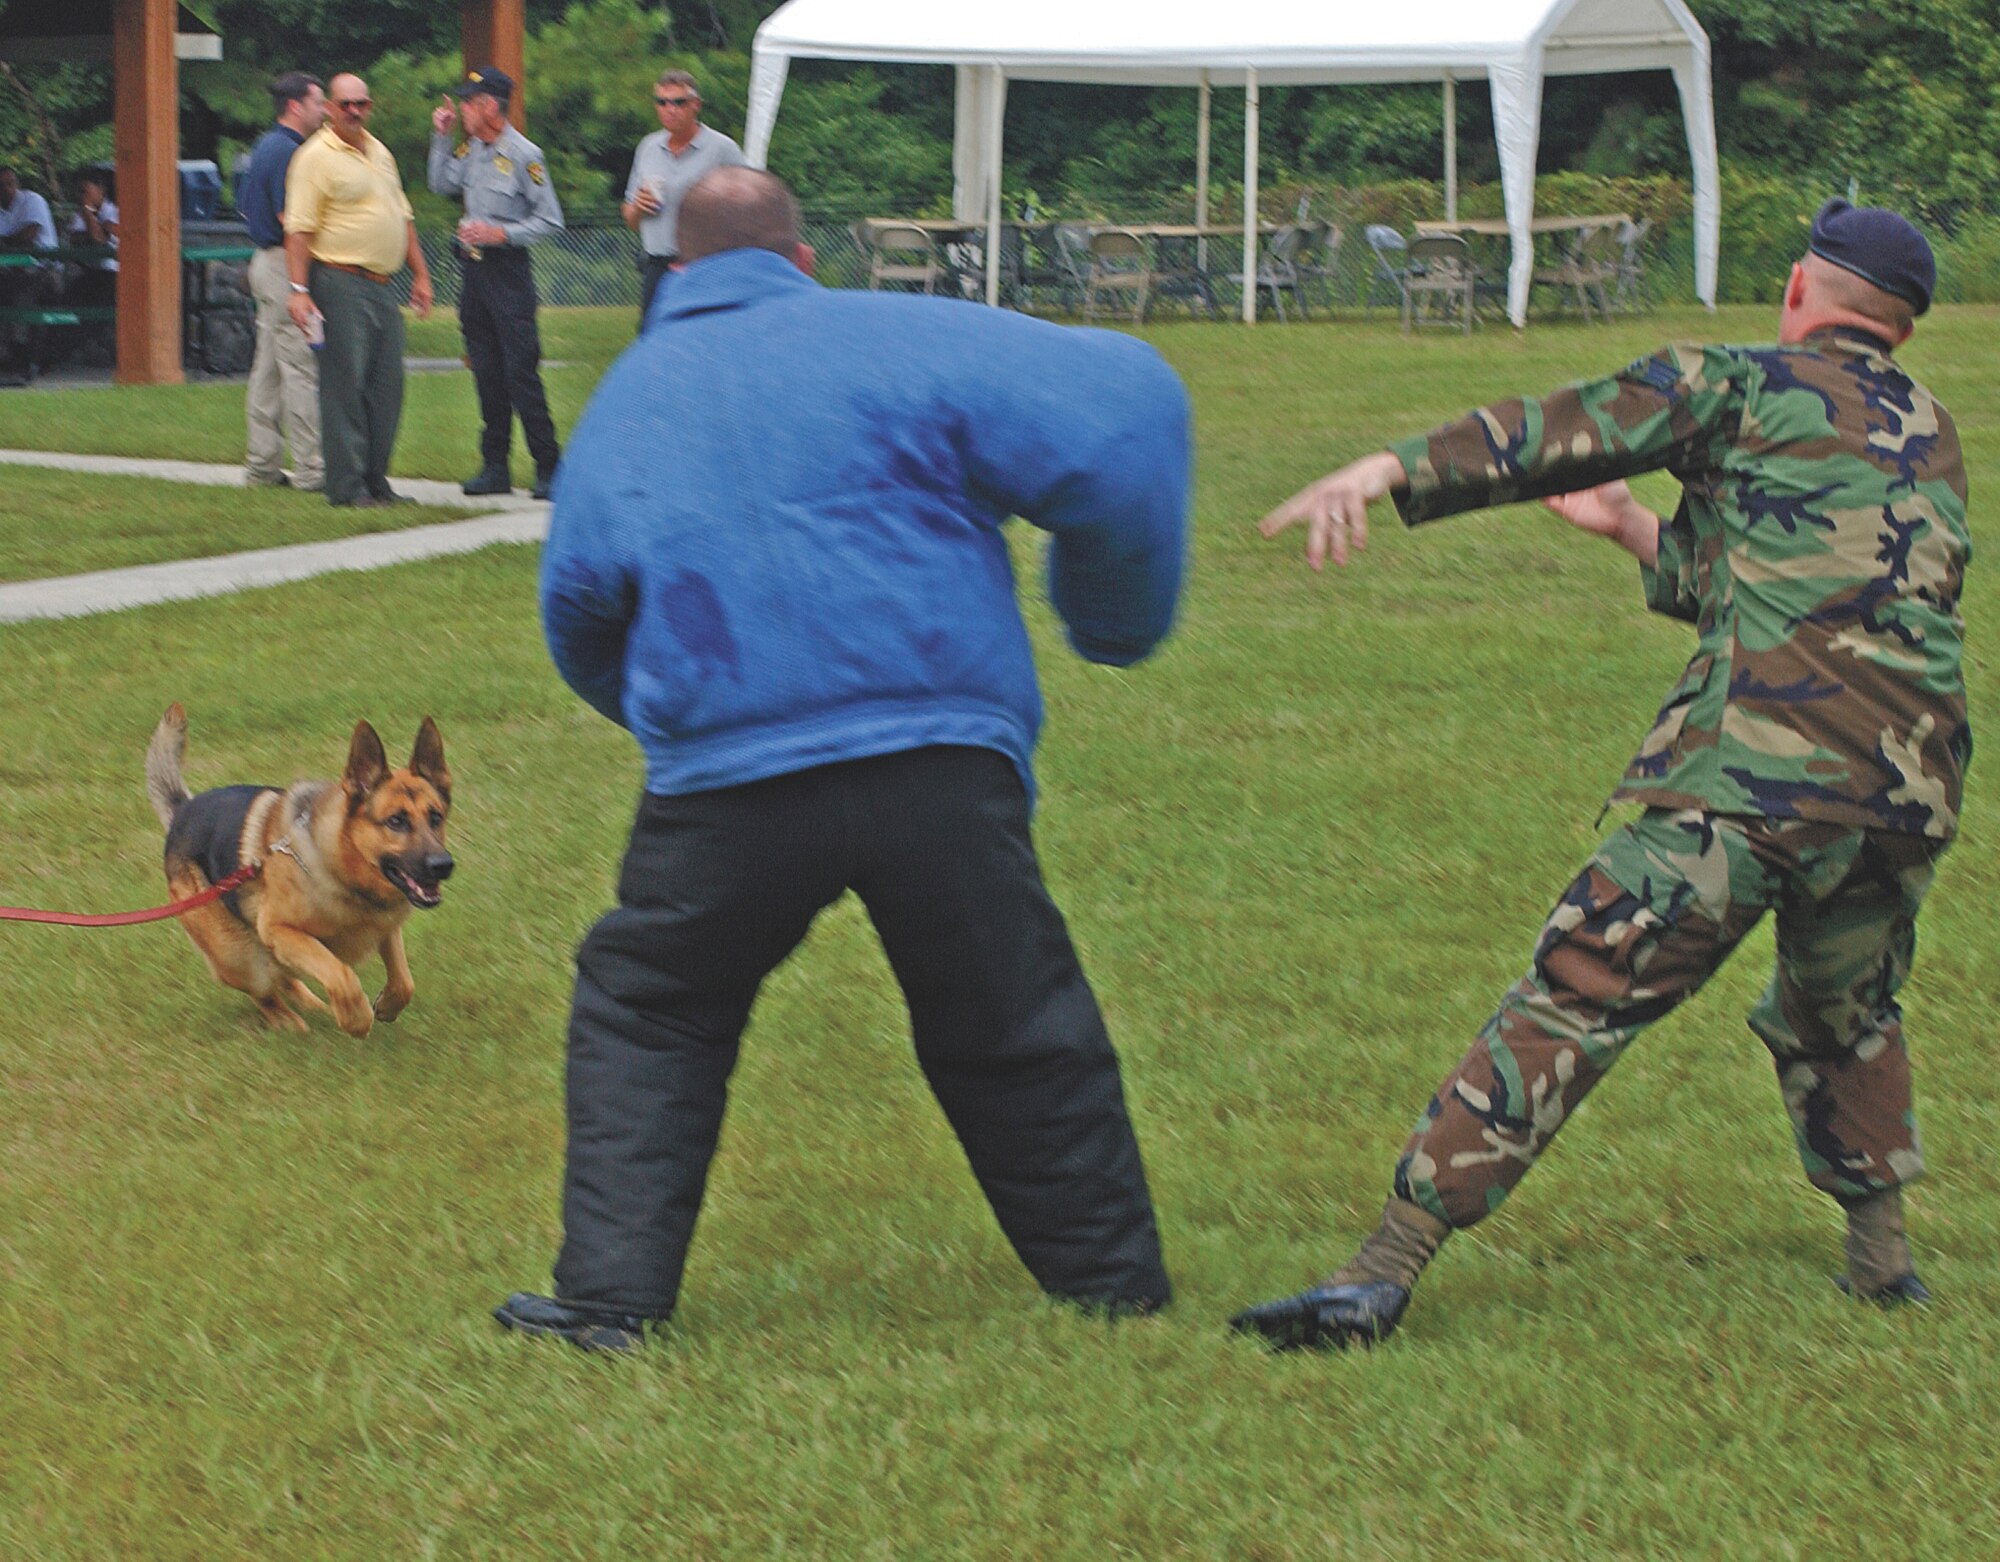 Aris, a military working dog, prepares to pounce on Staff Sgt. Samuel Beckett, who is playing the role of a suspect fleeing from Senior Airman Jesse Hall, during an antiterrorism awareness event hosted by the Office of Special Investigations here Sept. 14. Both Airmen and the dog are members of the 4th Security Forces Squadron.                               